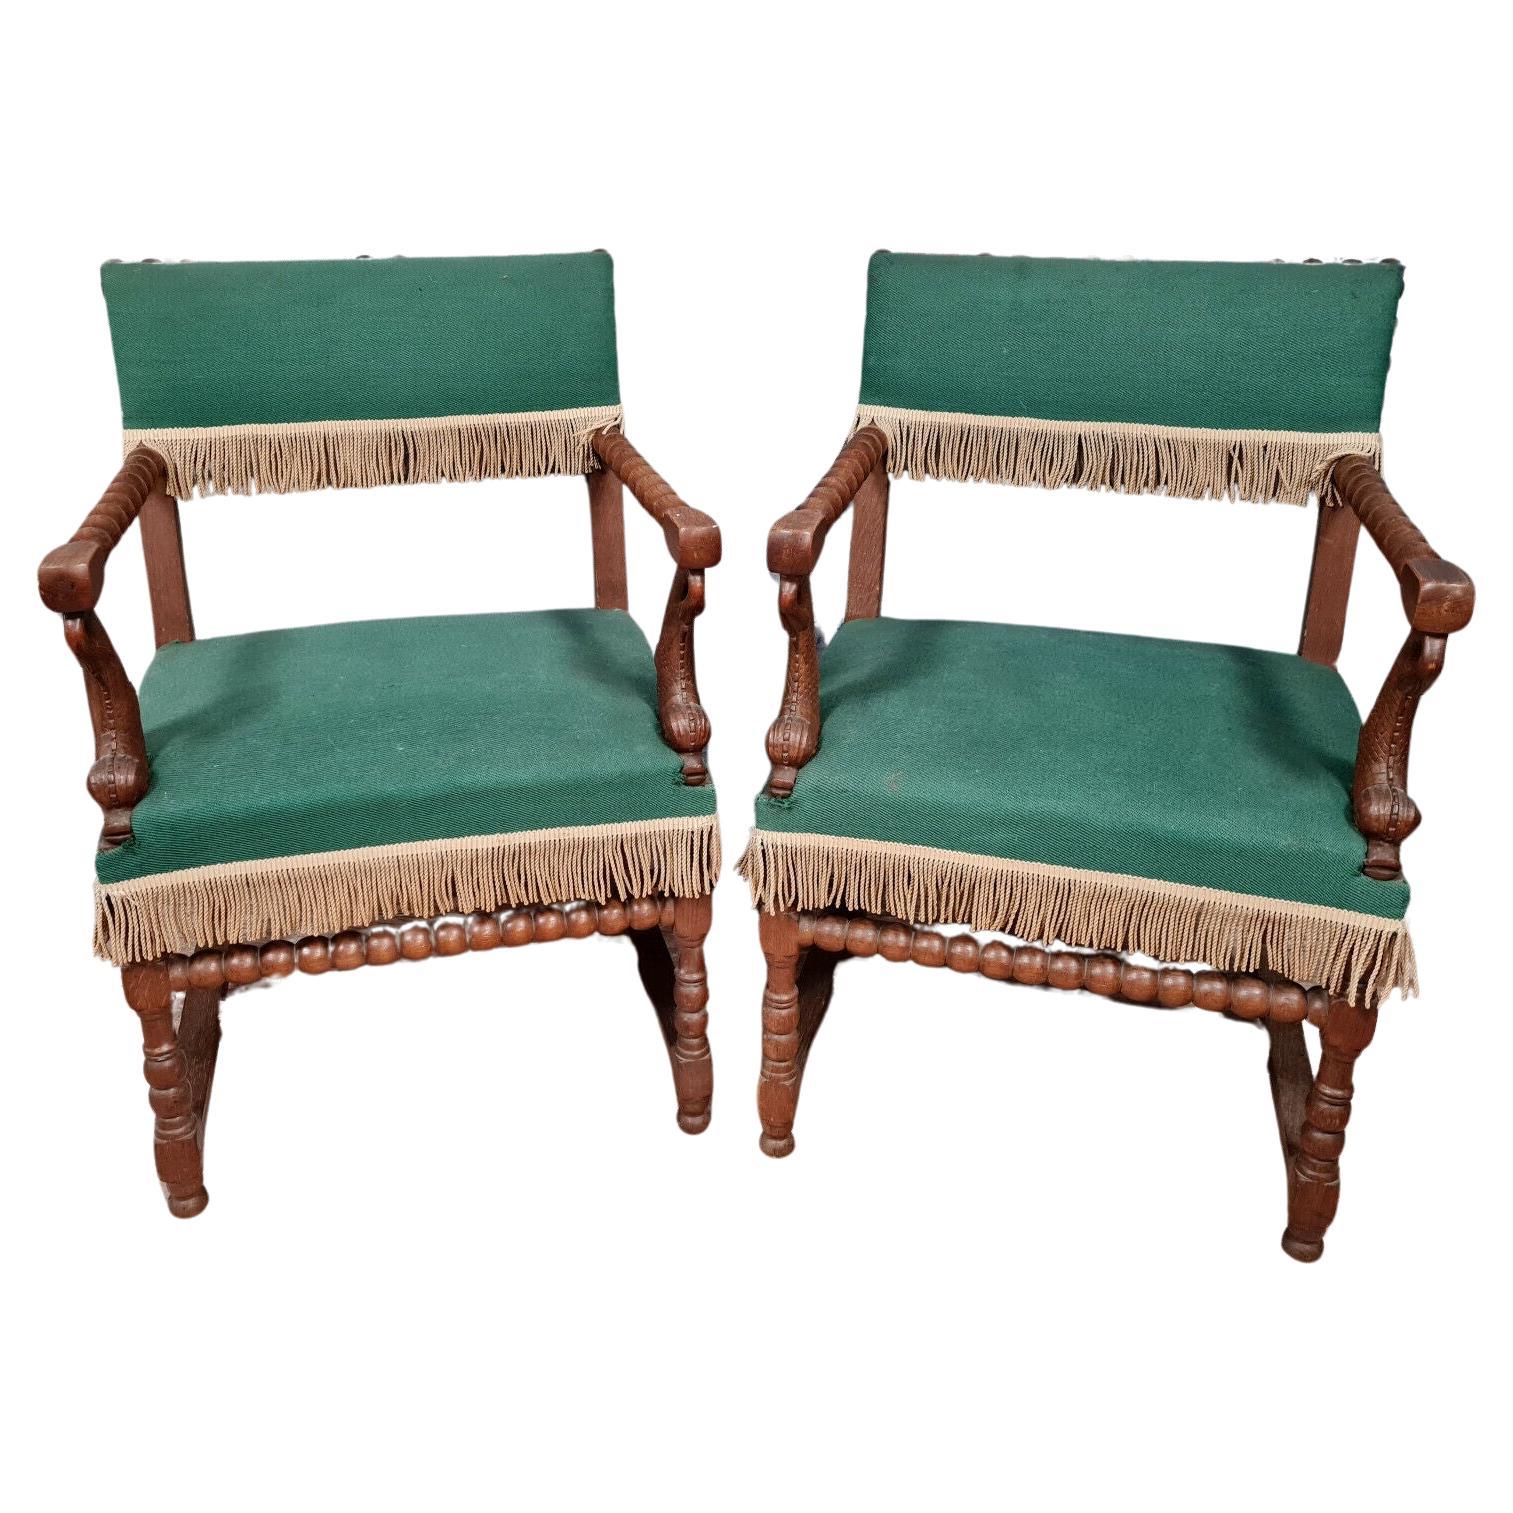 Exquisite Pair of Solid Oak Louis XIII Armchairs from circa 1850s -1X11 For Sale